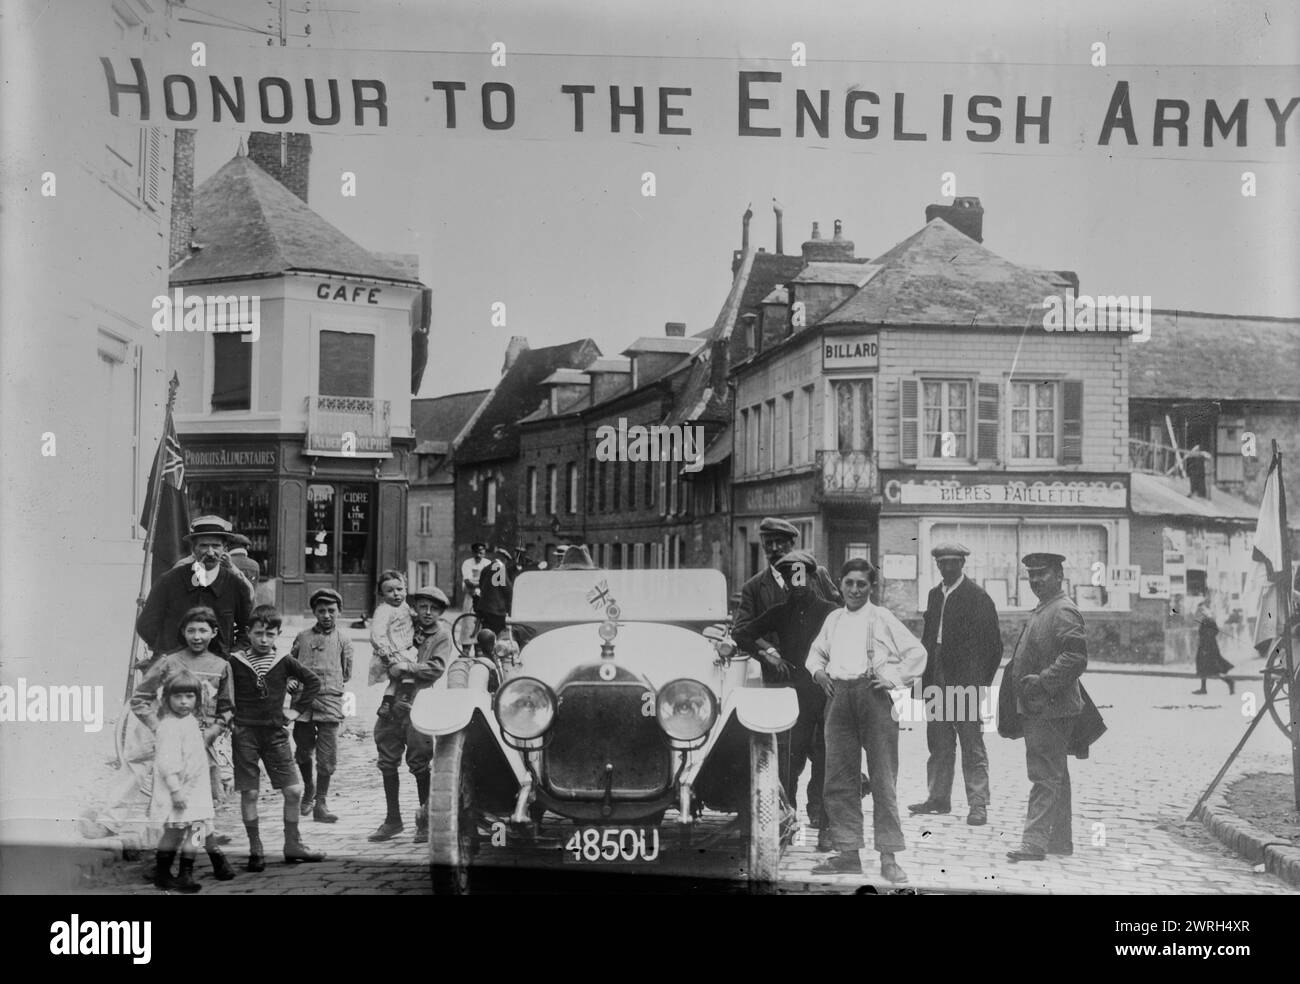 Welcome to British, Boulogne, between c1914 and c1915. French people in street with an automobile with banner &quot;Honour to the English Army&quot; hung above them, during World War I, Boulogne-sur-Mer, France. Stock Photo